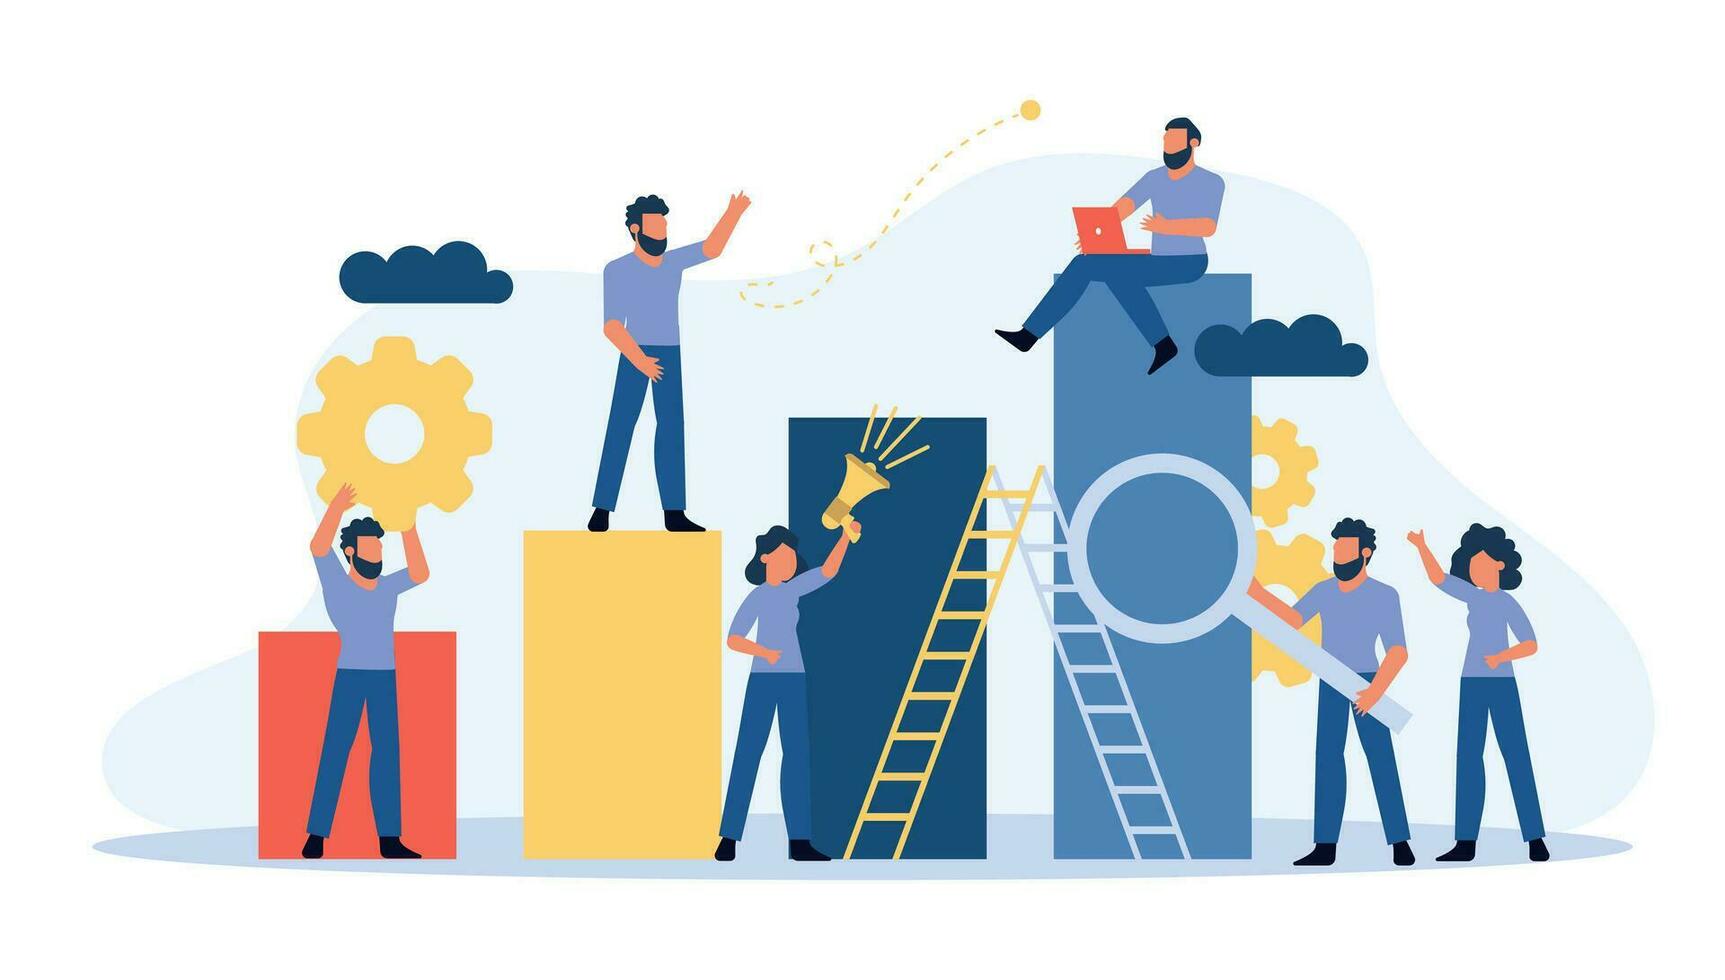 Analytic partnership vector illustration background with man and woman. Development bar chart concept company. Teamwork management cooperation strategy office banner work. Data solution character job